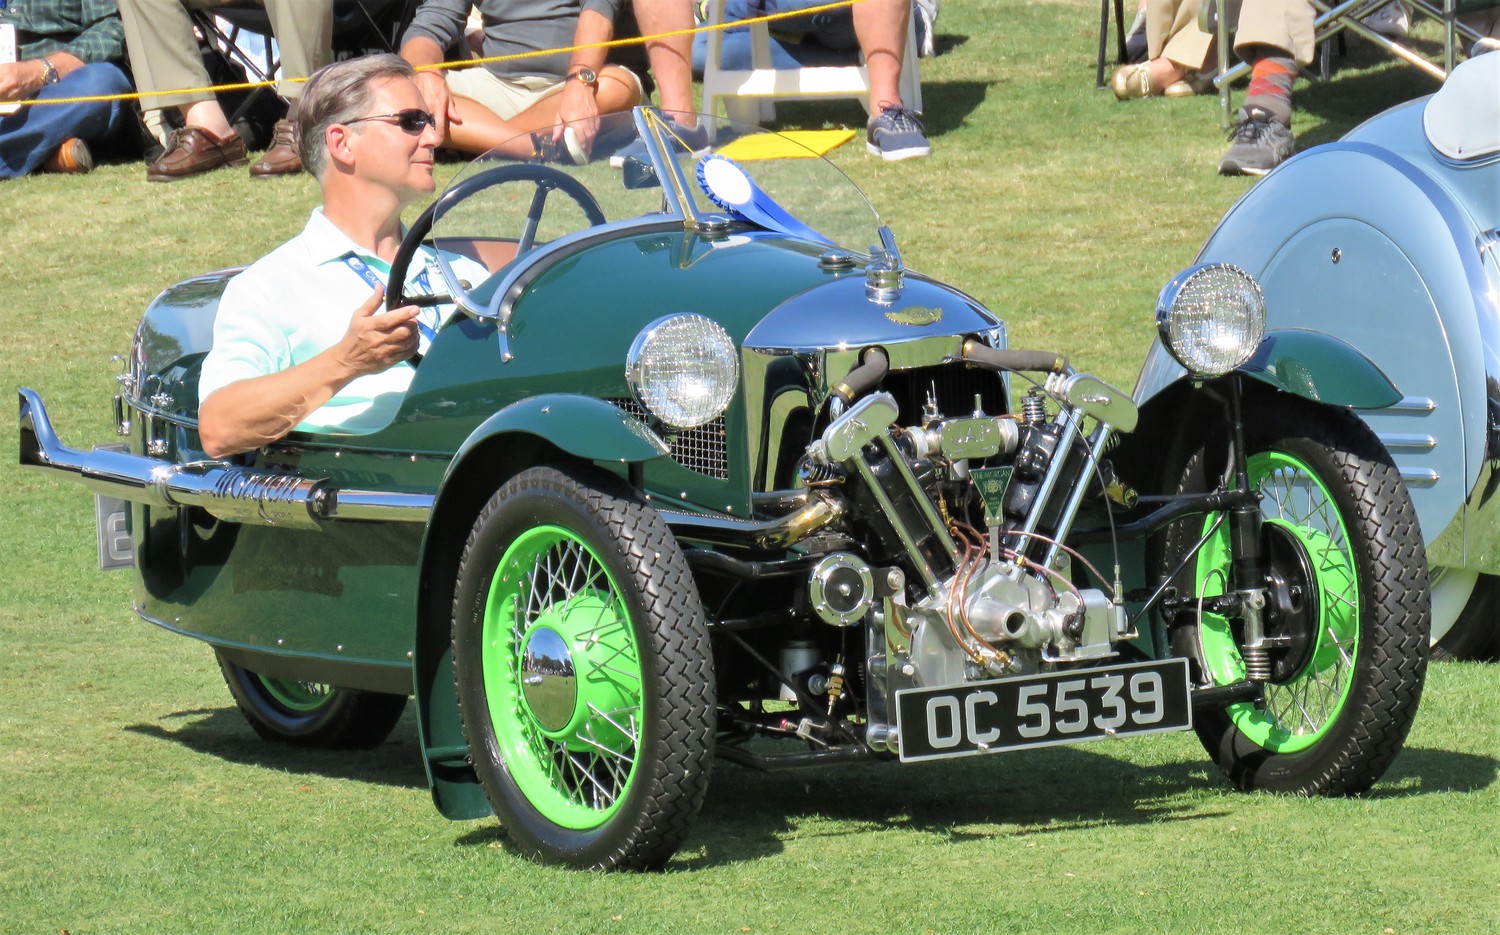 , Impressive Amelia Island Concours that became a moveable feast, ClassicCars.com Journal